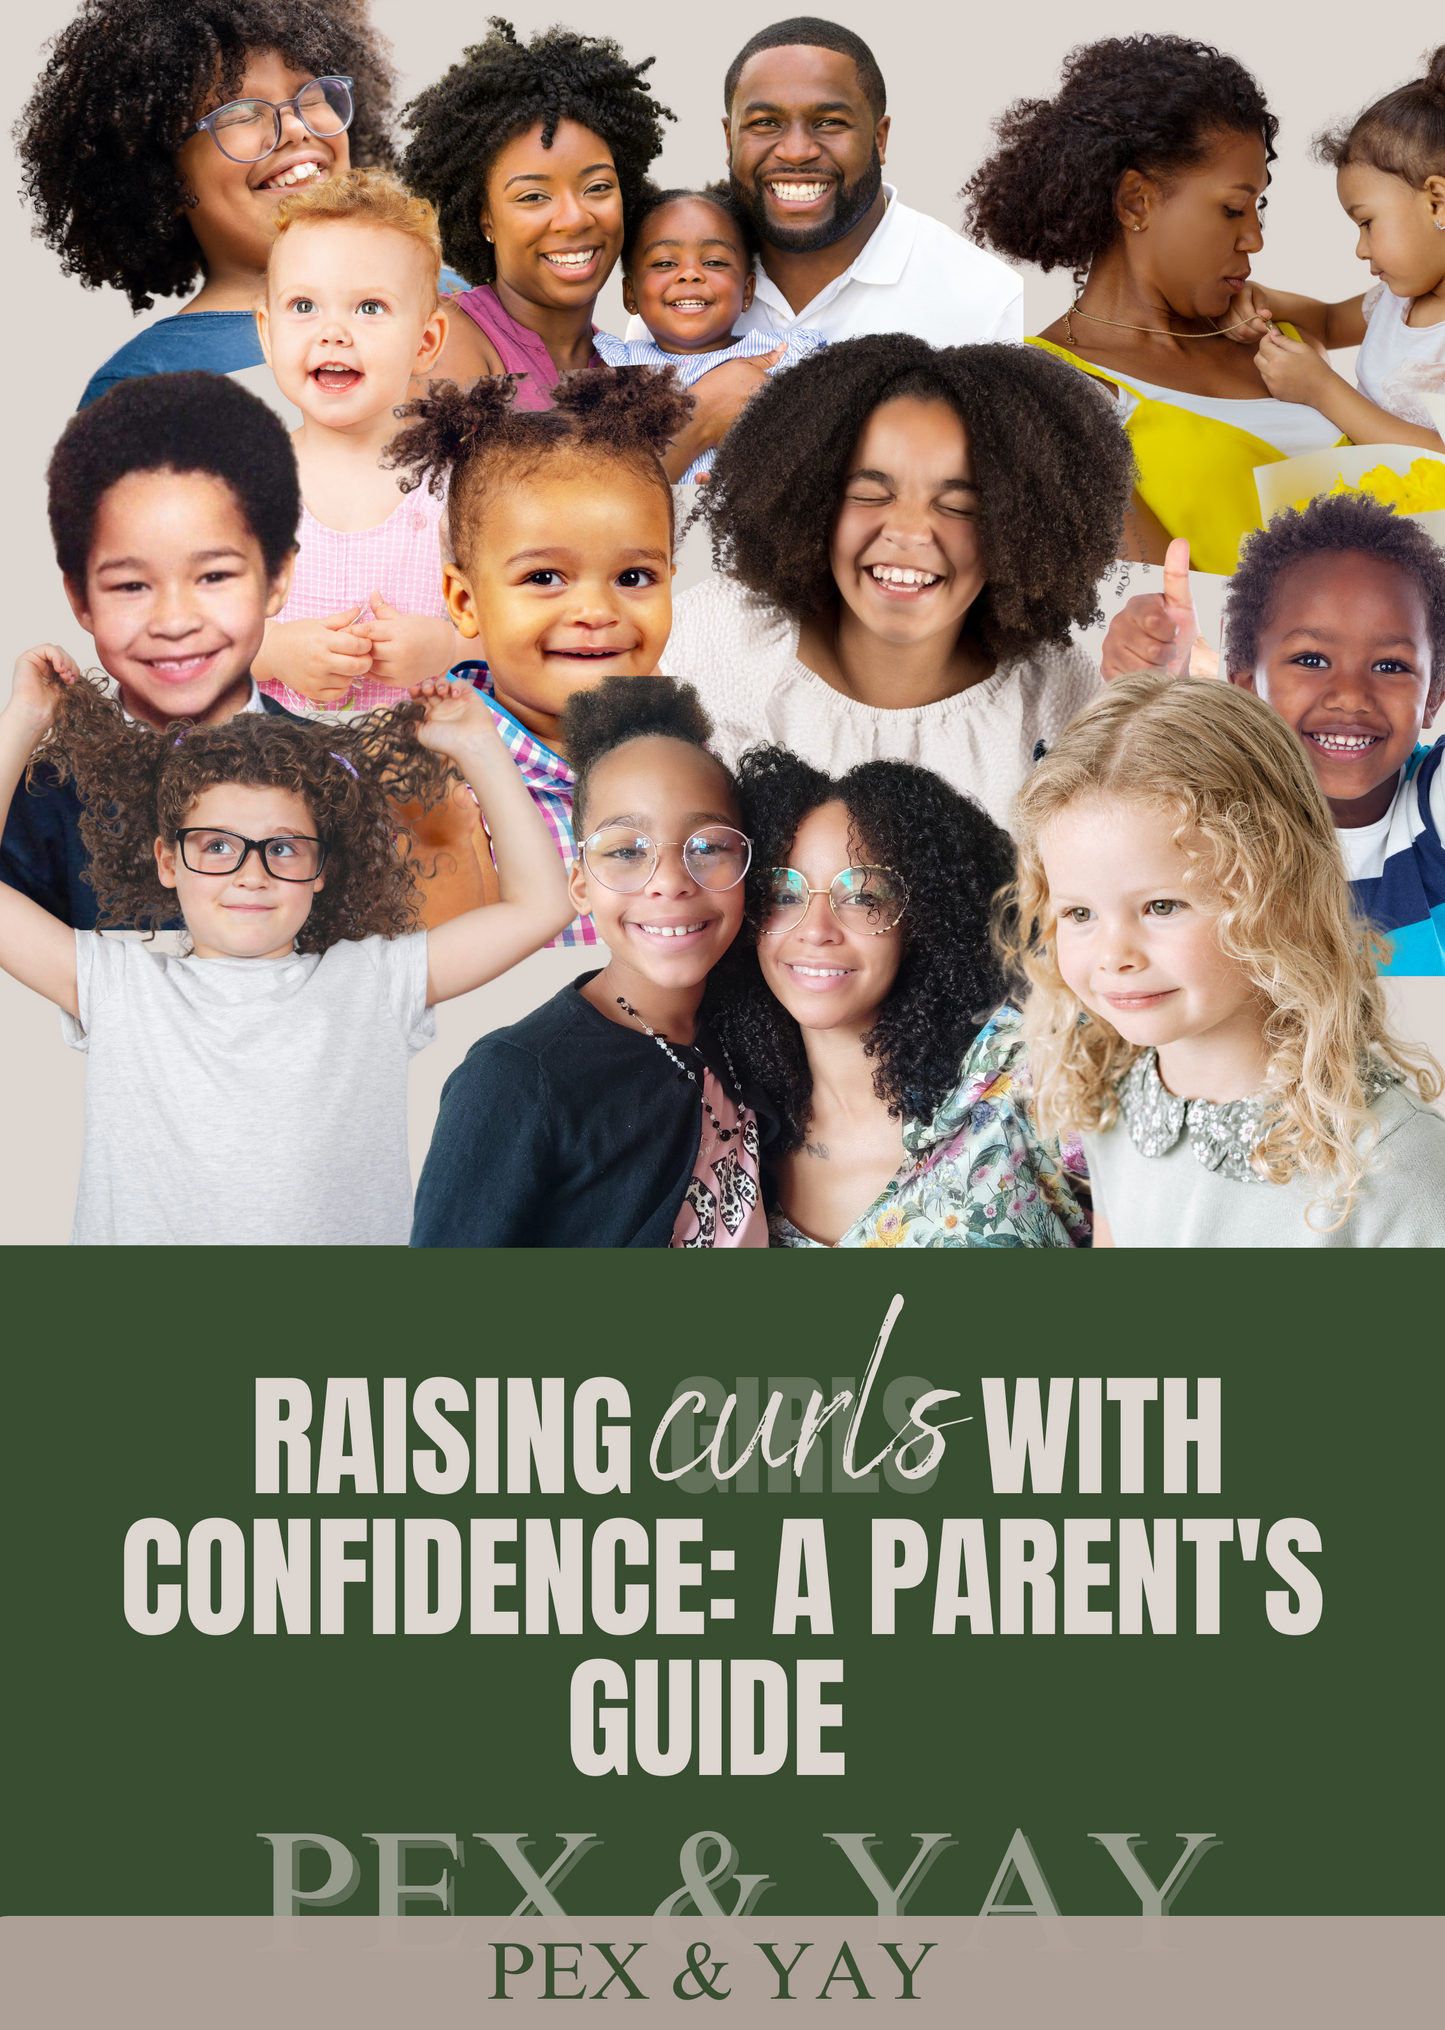 PEX & YAY Raising Curls with Confidence: A Parent's Course